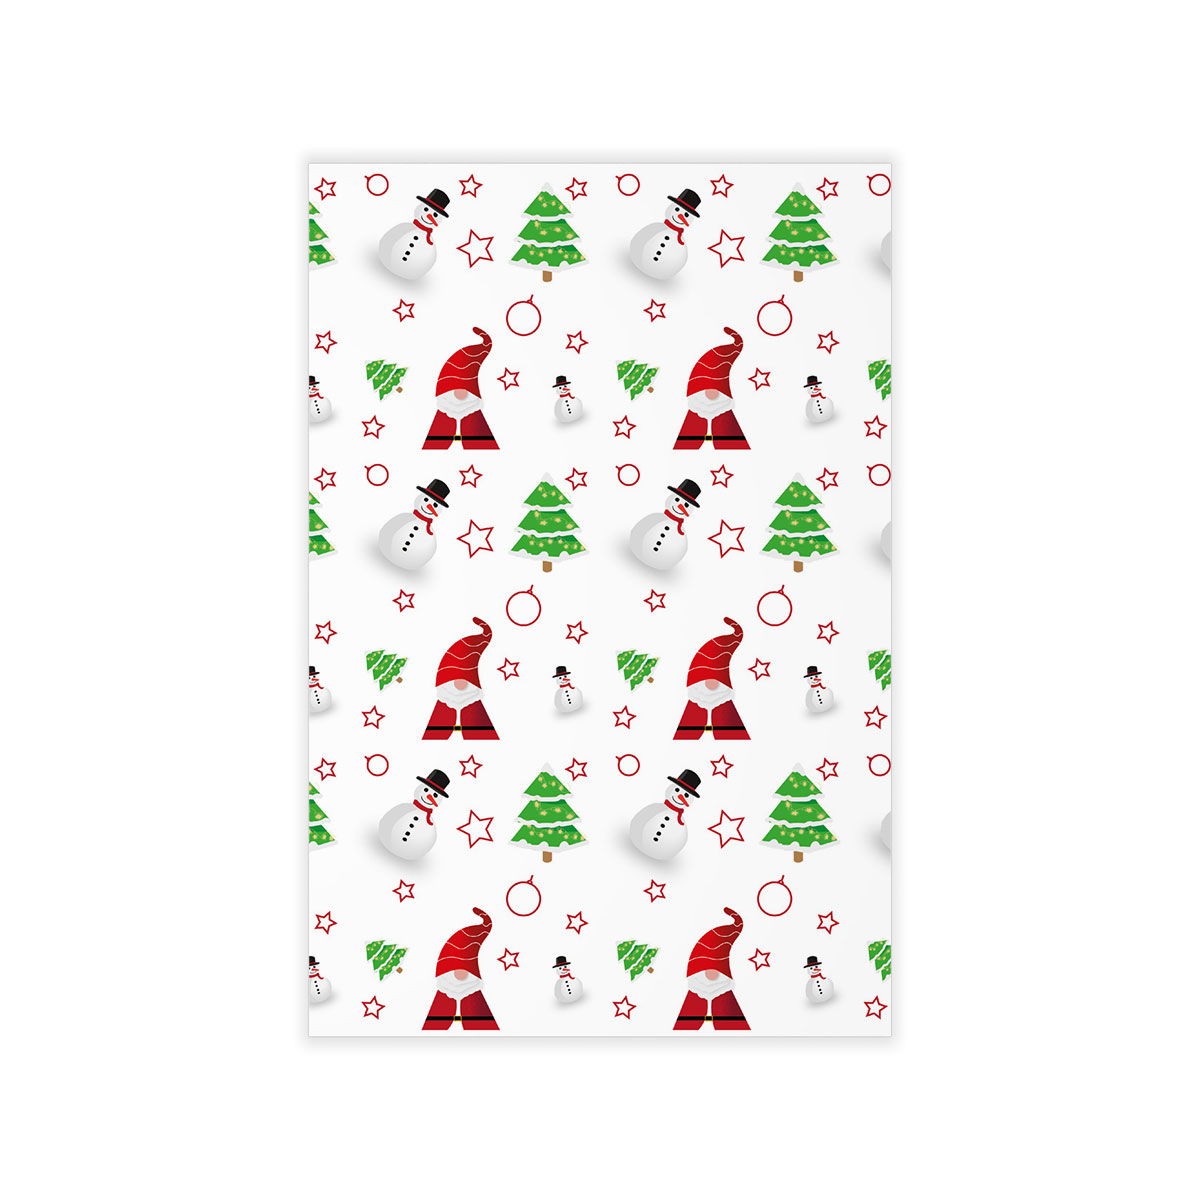 Santa Claus, Snowman Clipart And Pine Tree Silhouette Seamless Pattern Wall Decals